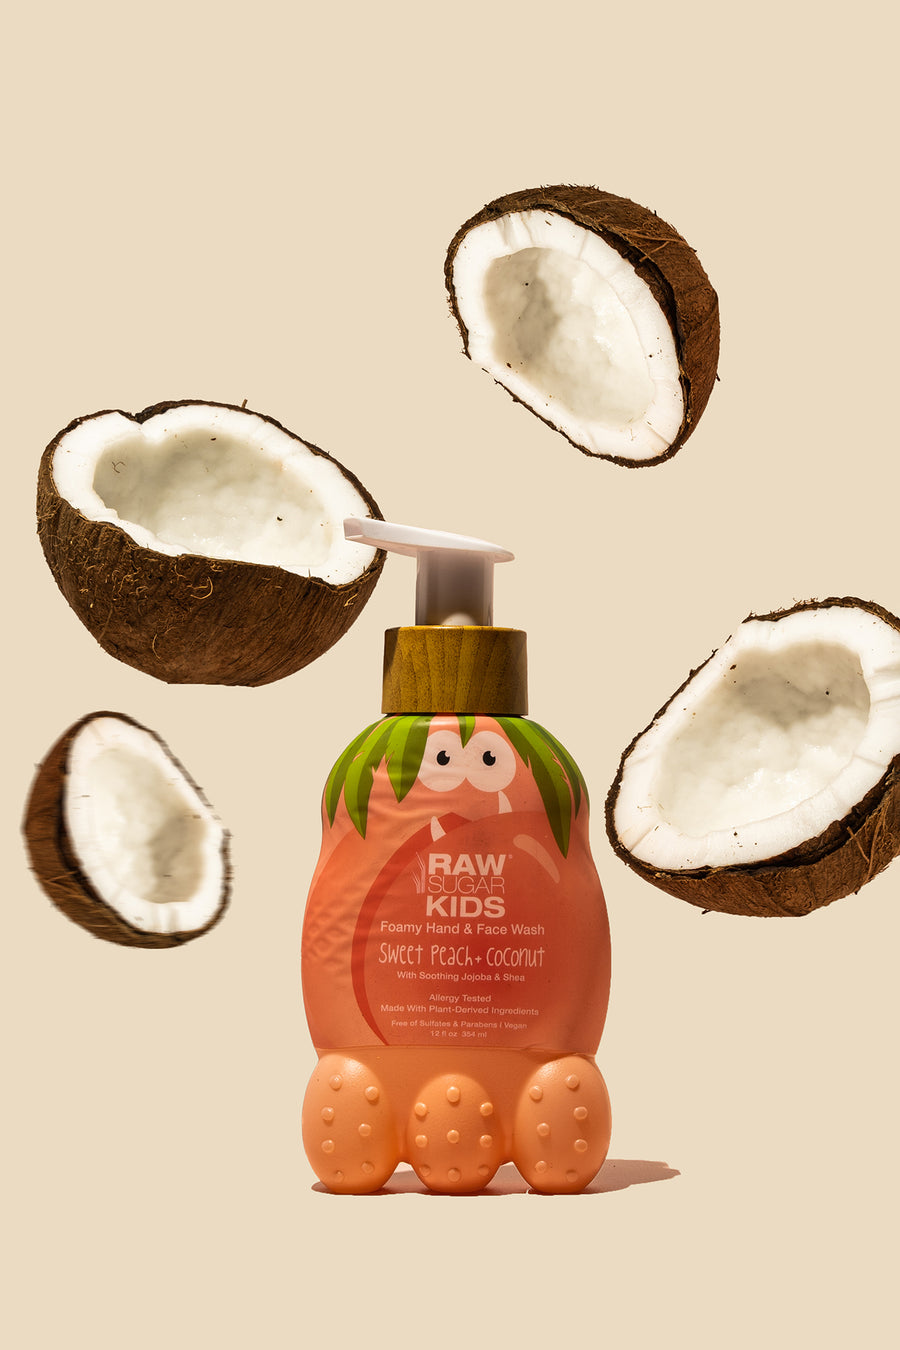 Raw Sugar Kids Foamy Hand + Face Wash, Sweet Peach + Coconut standing with floating fresh raw coconut halves